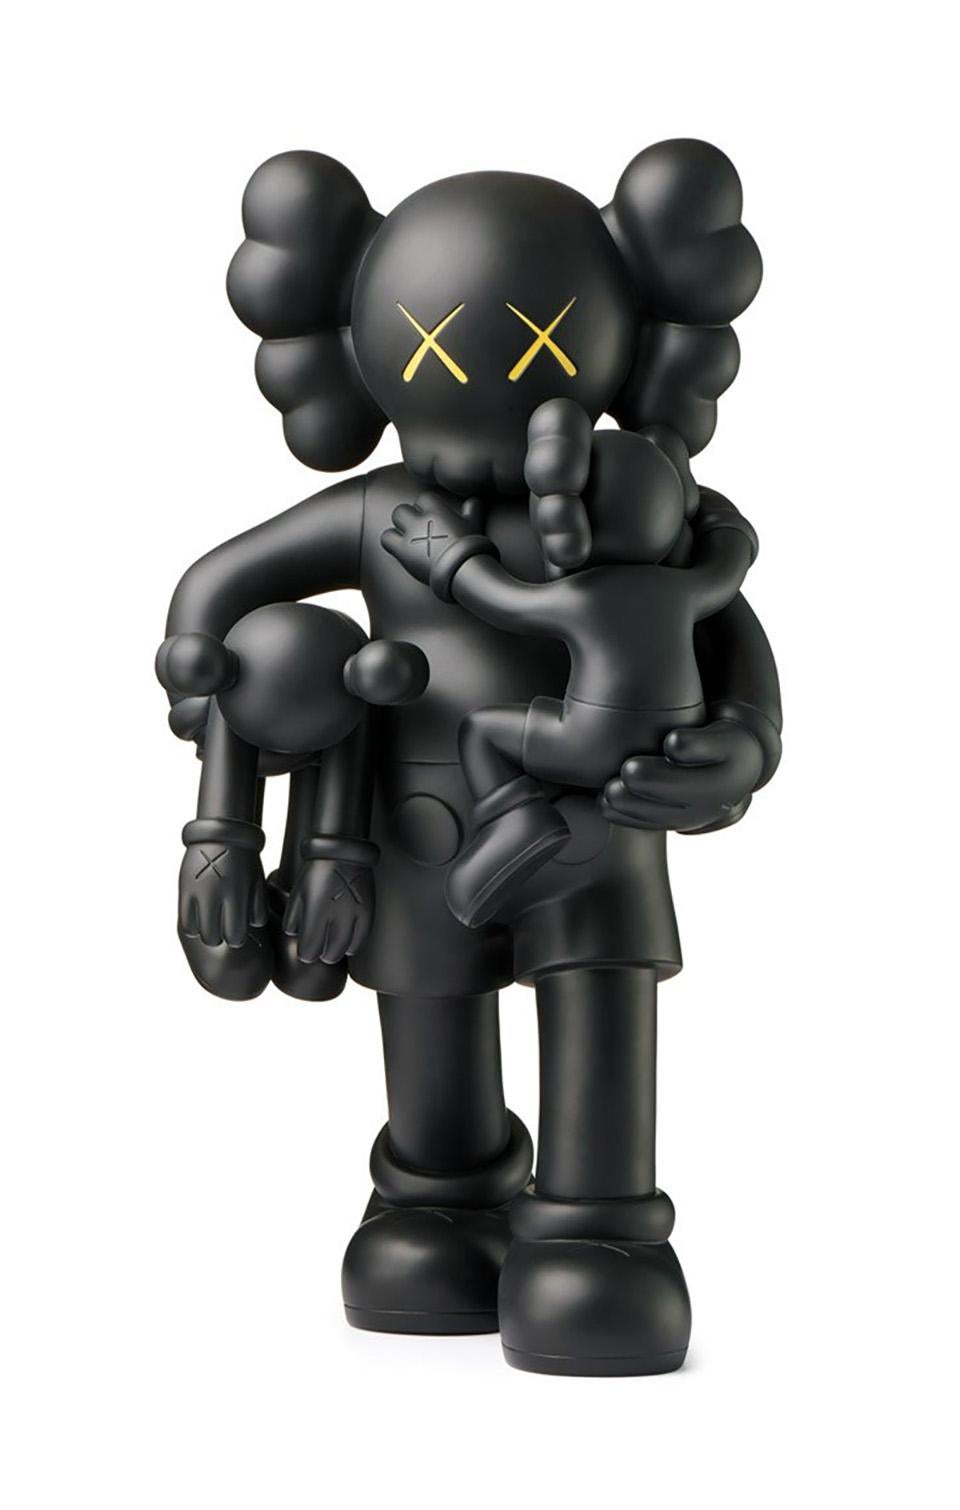 KAWS Clean Slate (Black), new & unopened in its original packaging. 
A well-received work and variation of KAWS' large scale Clean Slate sculpture - a key highlight of KAWS’ major museum exhibition KAWS: WHERE THE END STARTS where it was displayed